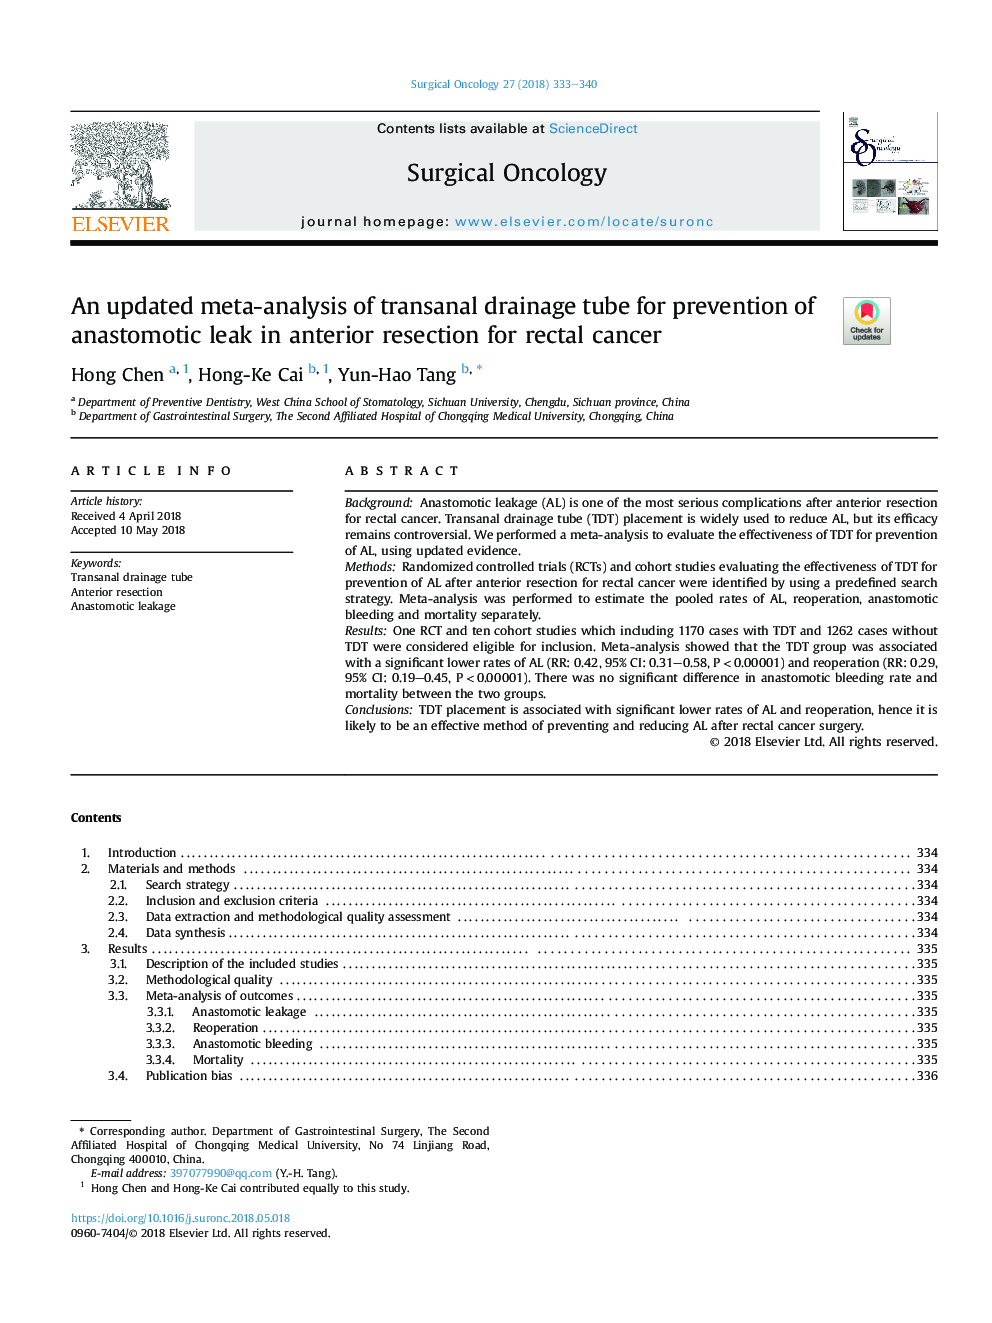 An updated meta-analysis of transanal drainage tube for prevention of anastomotic leak in anterior resection for rectal cancer